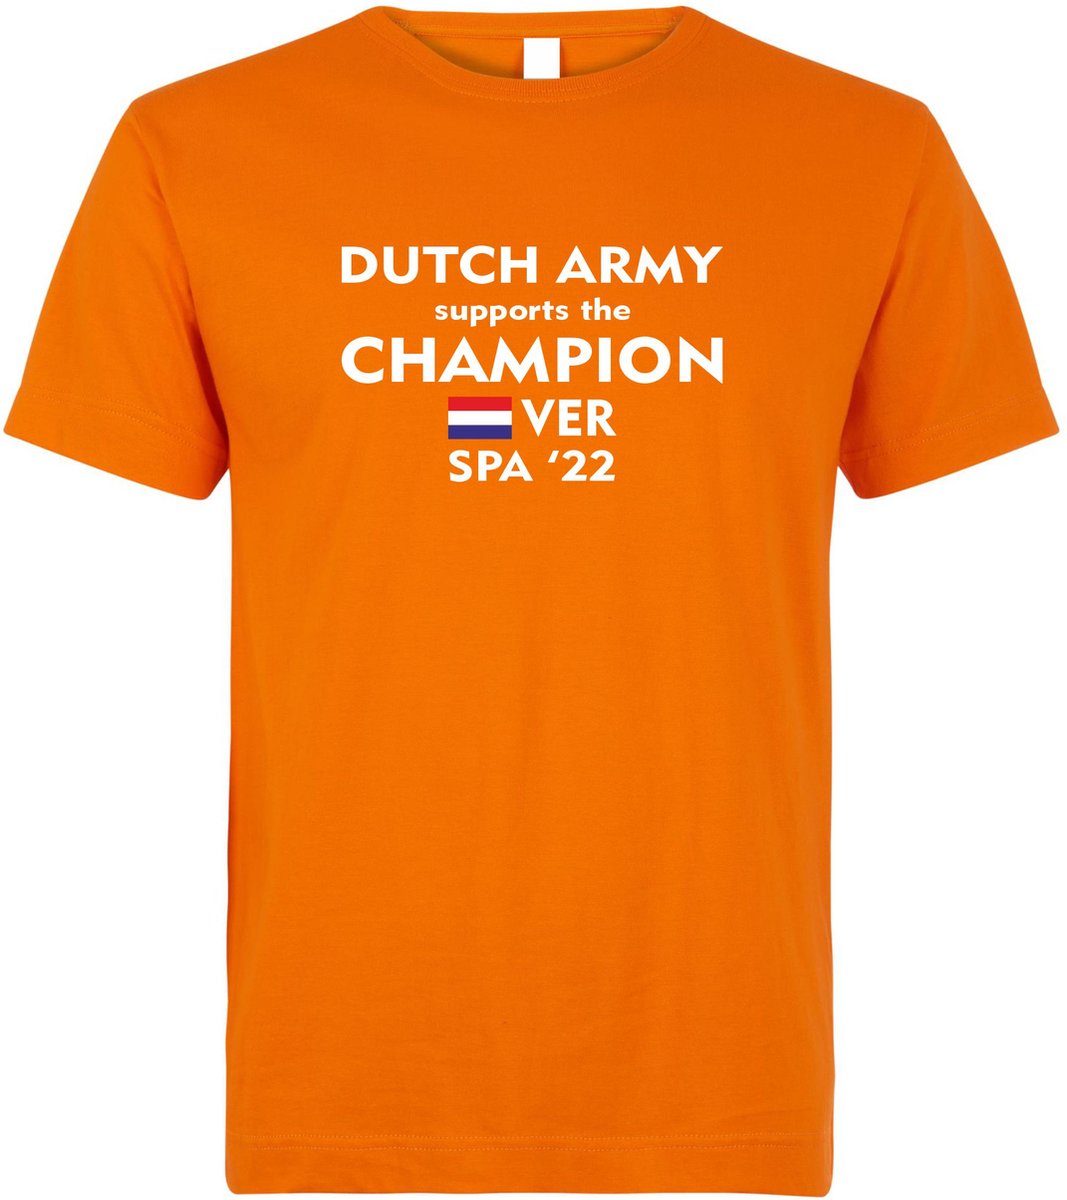 T-shirt Dutch Army supports the Champion Spa 22 | Max Verstappen / Red Bull Racing / Formule 1 fan | Grand Prix Circuit Spa-Francorchamps | kleding shirt | Oranje | maat 5XL